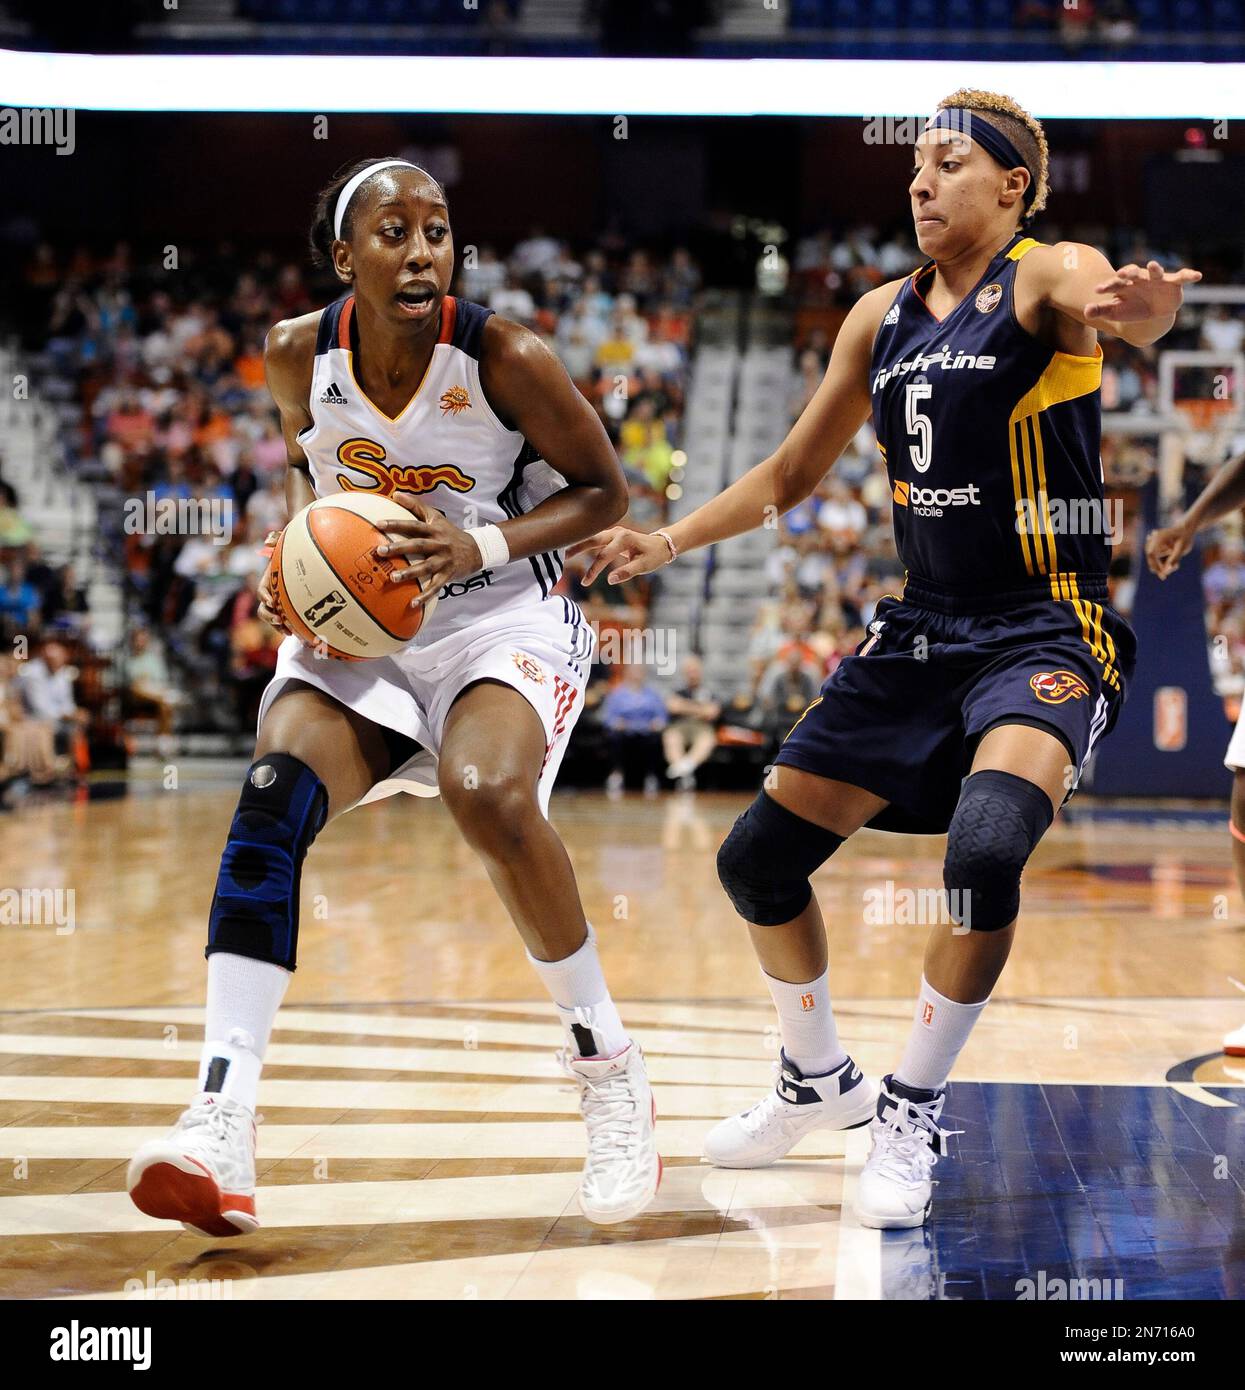 Connecticut Sun's Allison Hightower, left, is pressured by Indiana ...